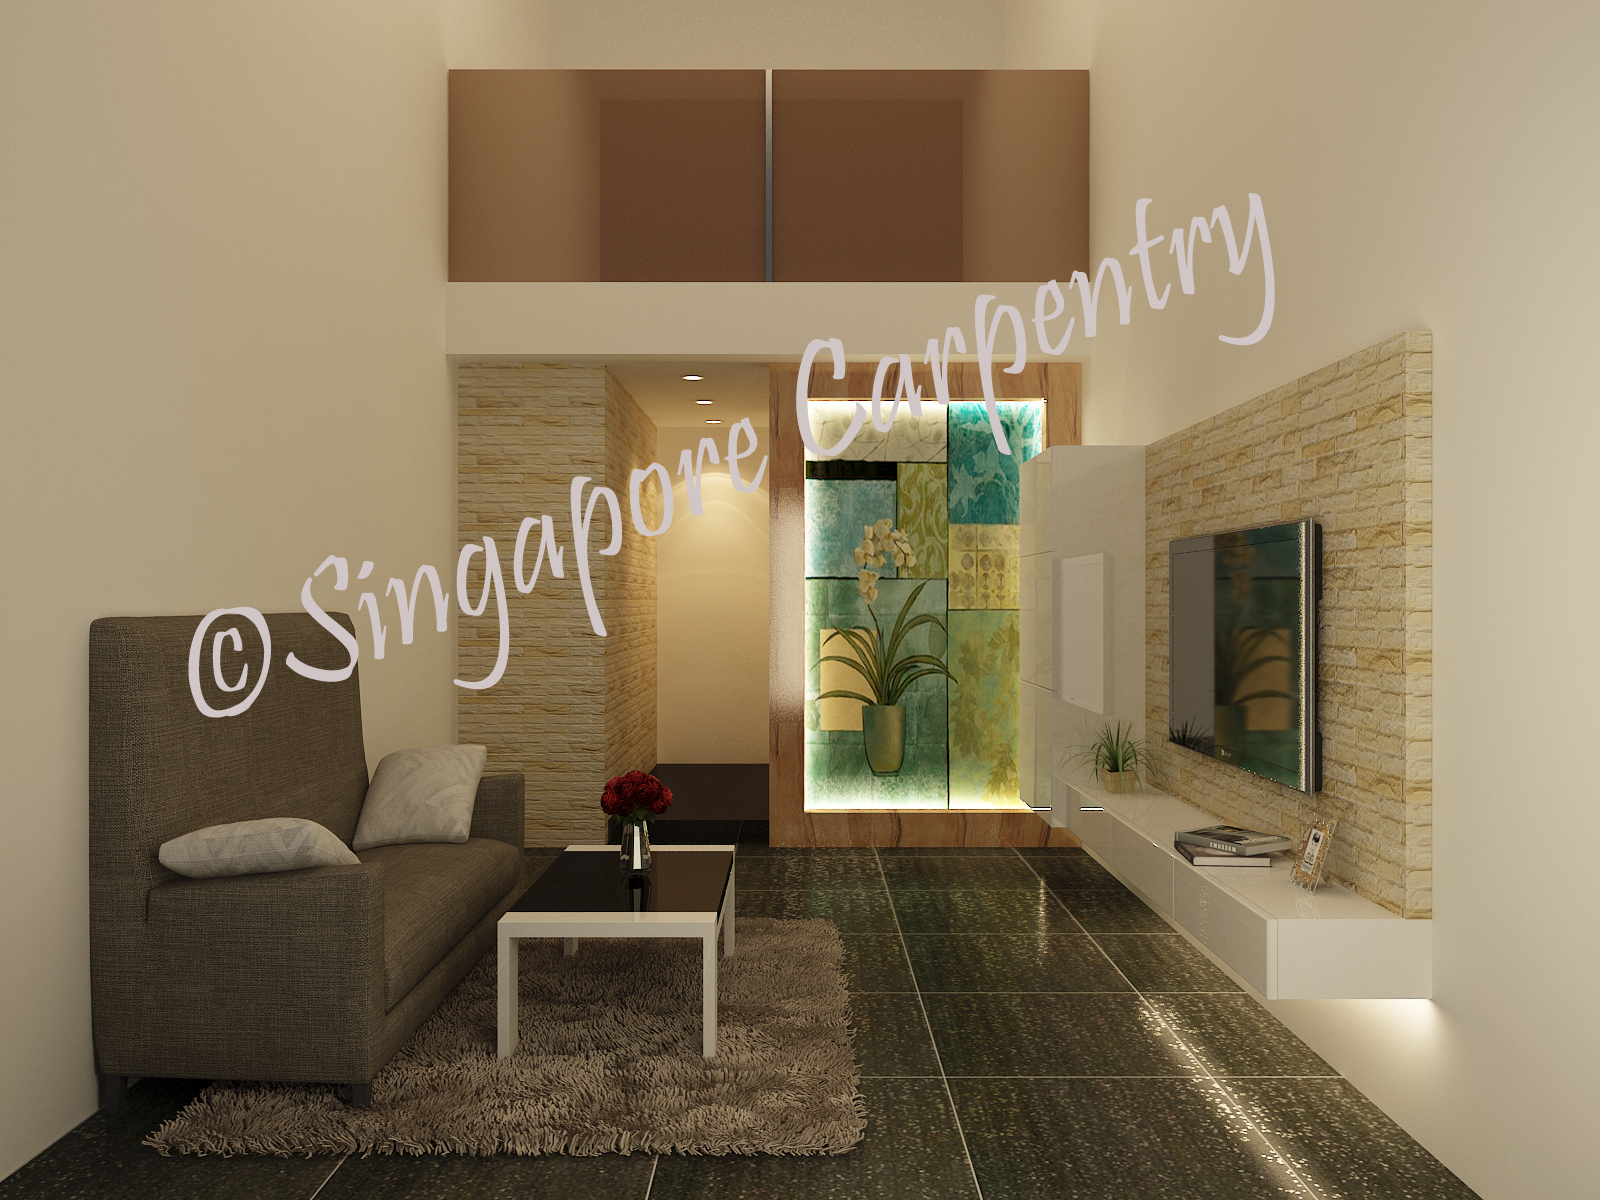 Singapore carpentry price my project